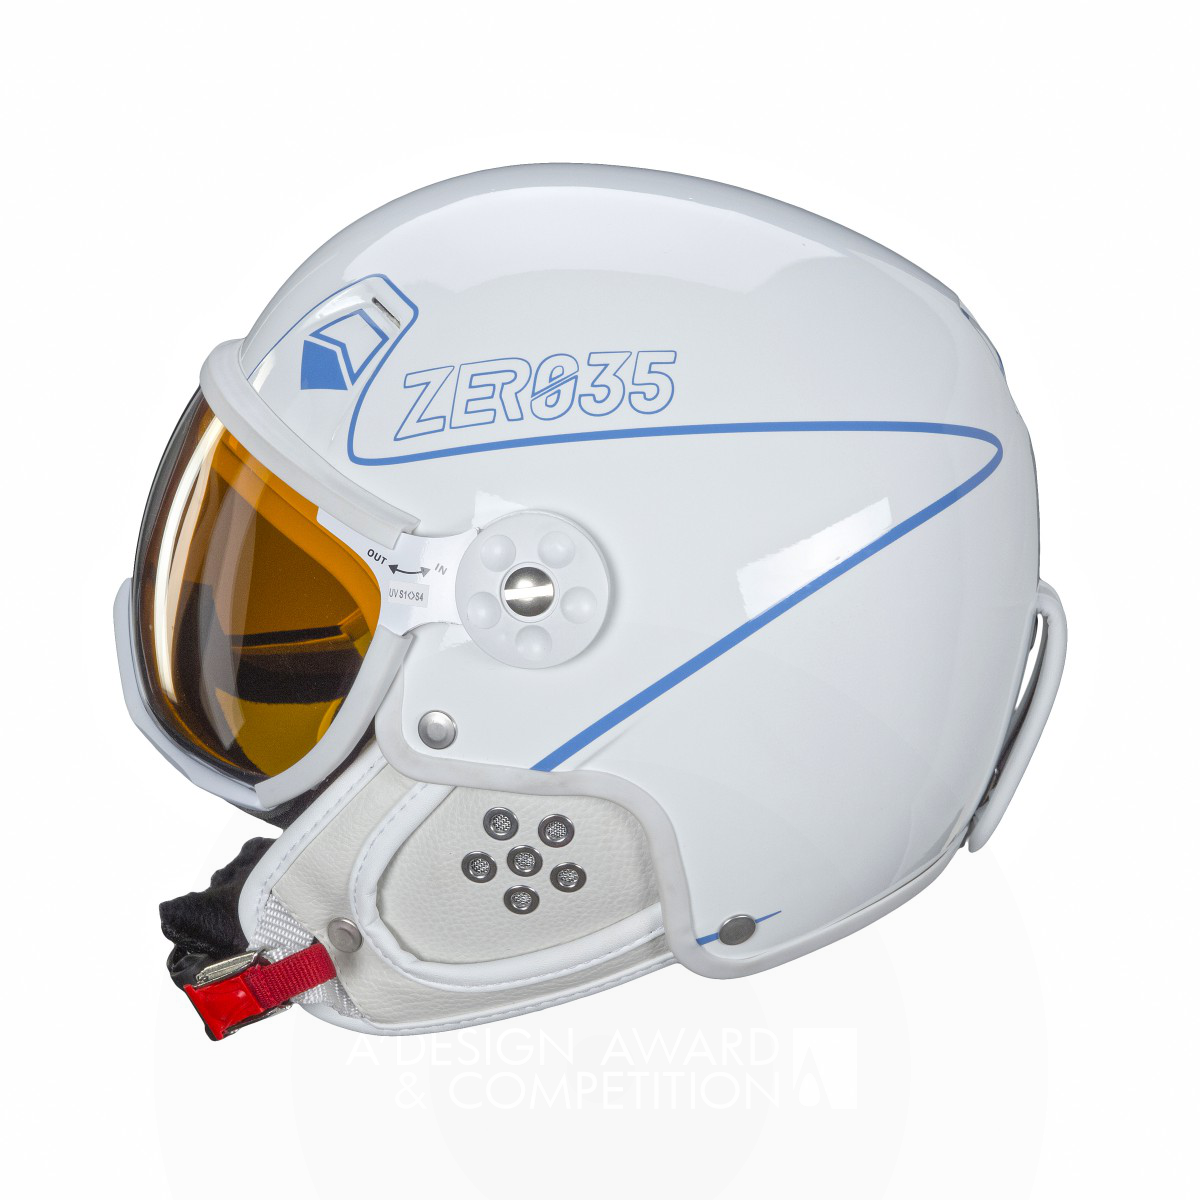 Z2 and Z3 Snow Helmets by Massimo Facchinetti